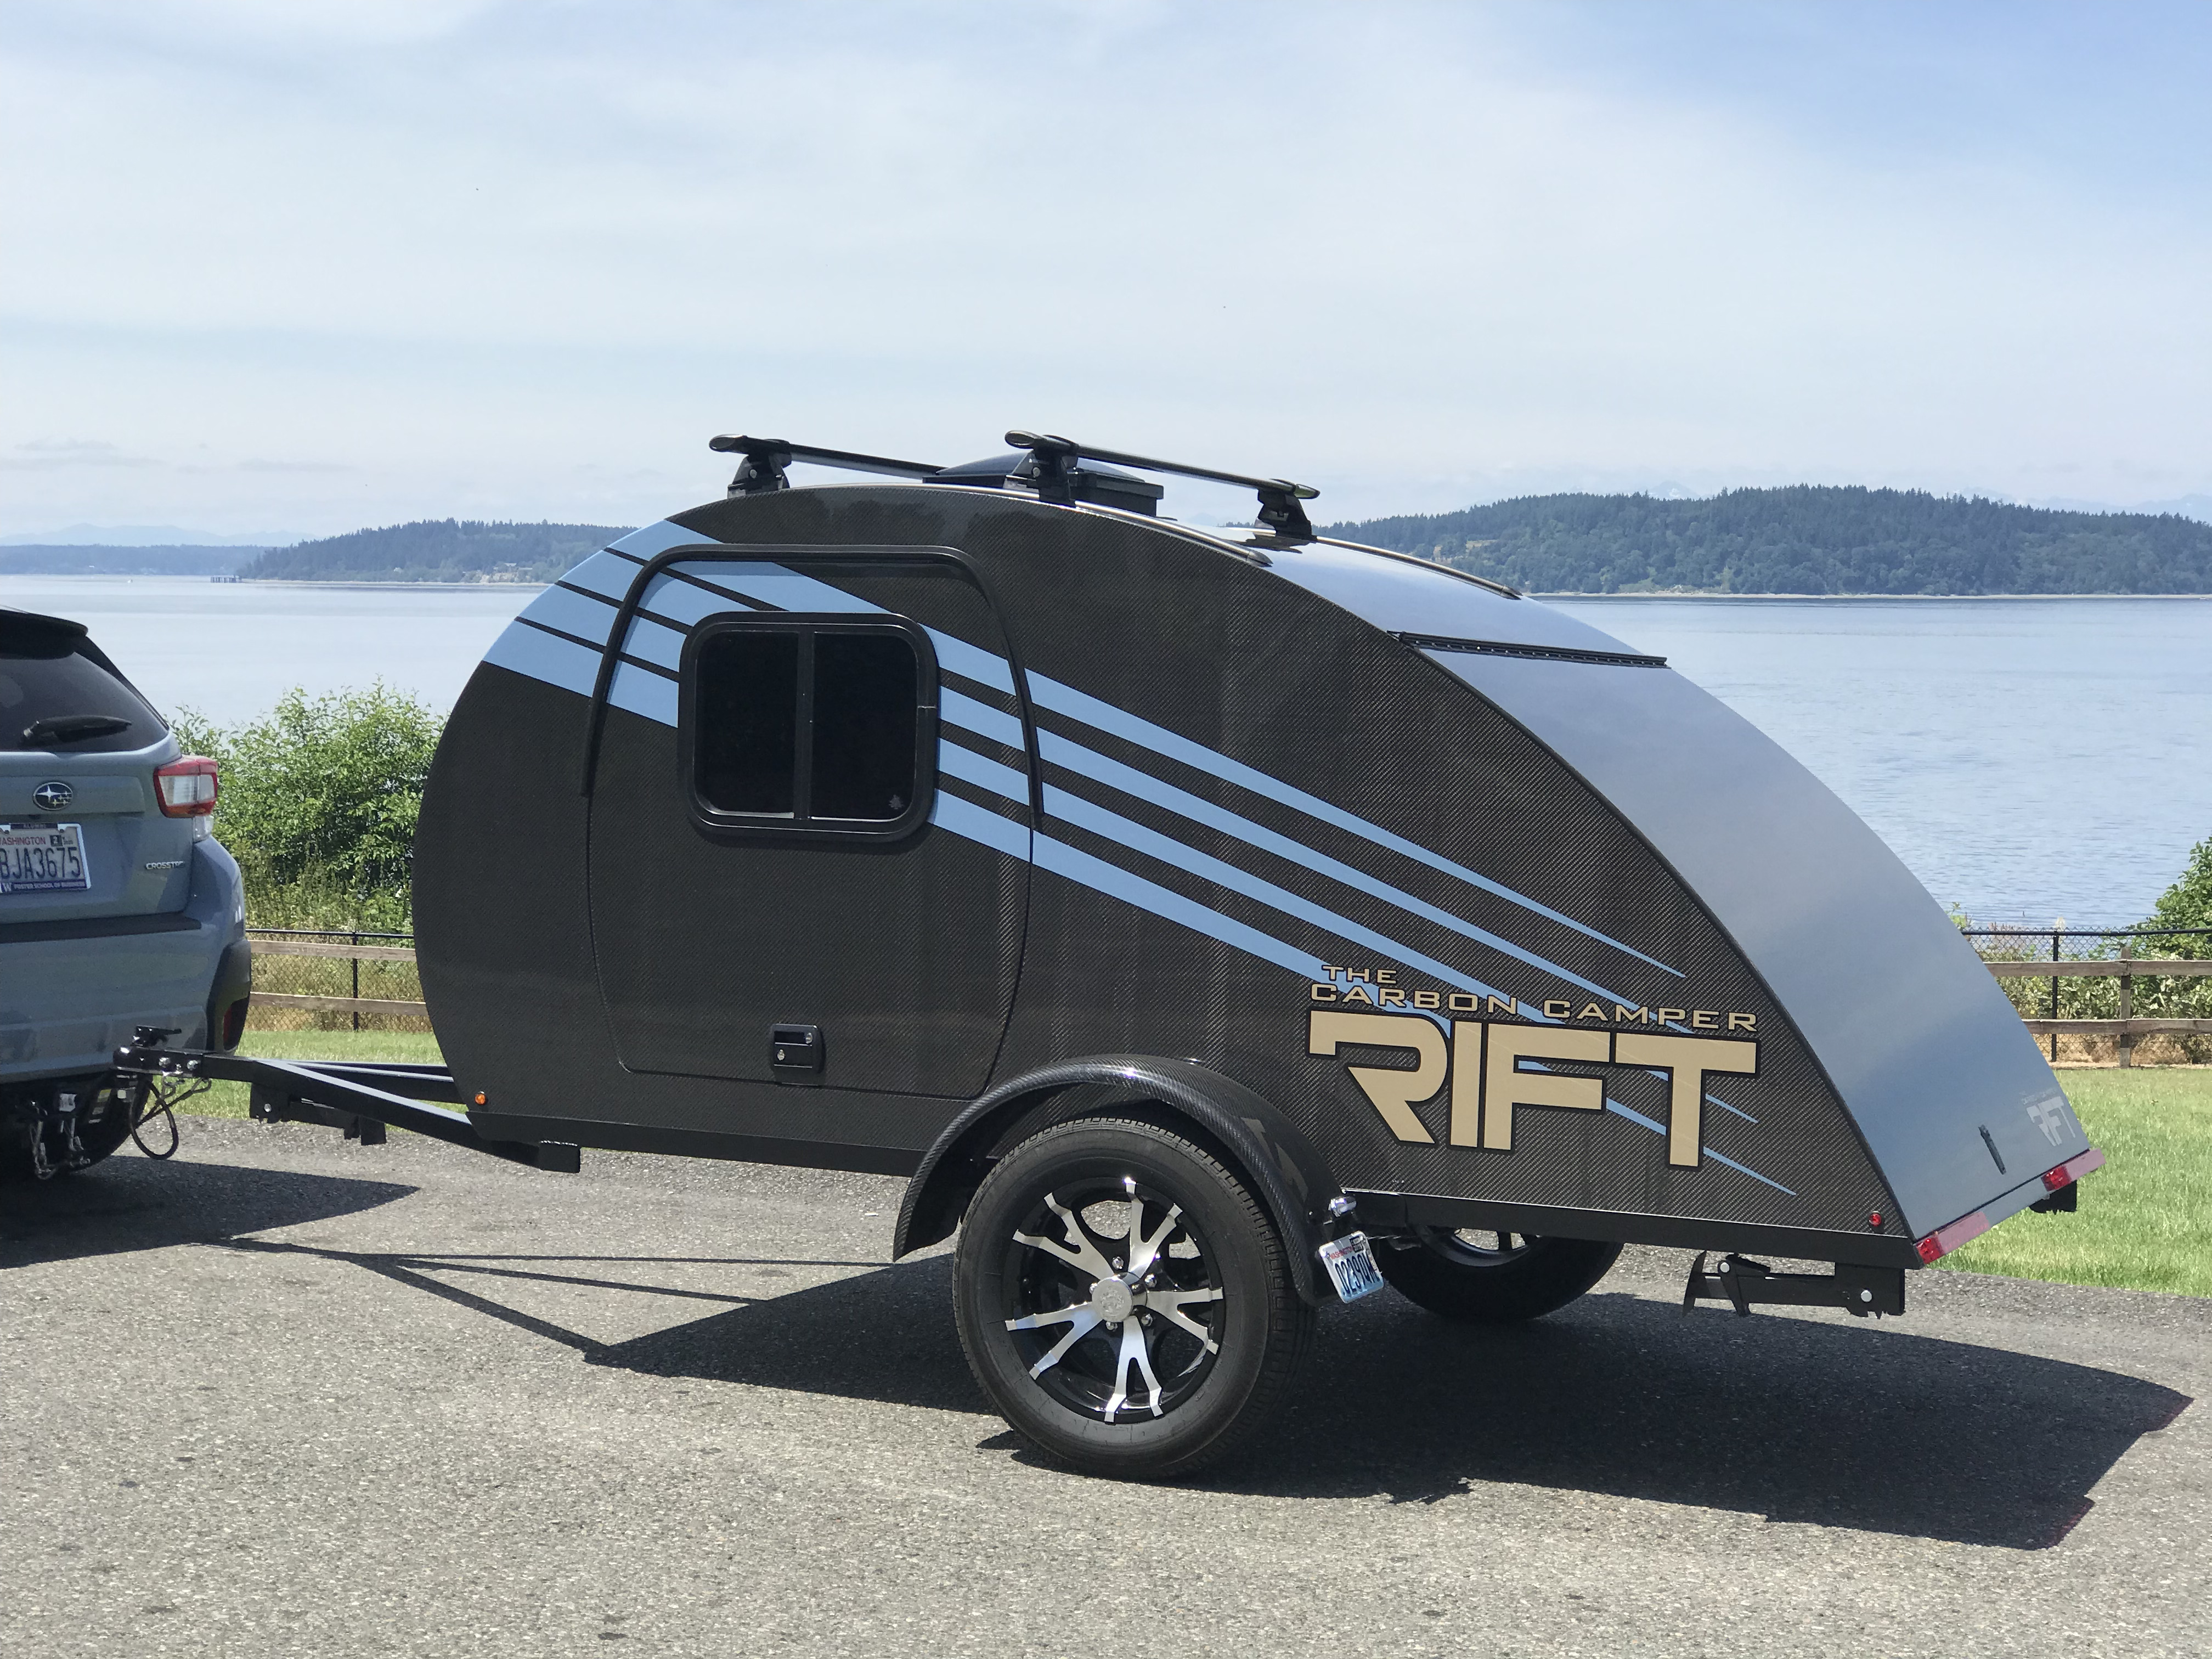 Carbon Lite Trailers Manufactures a distinctive carbon fiber teardrop-style trailer that weighs less than half as much as its rivals